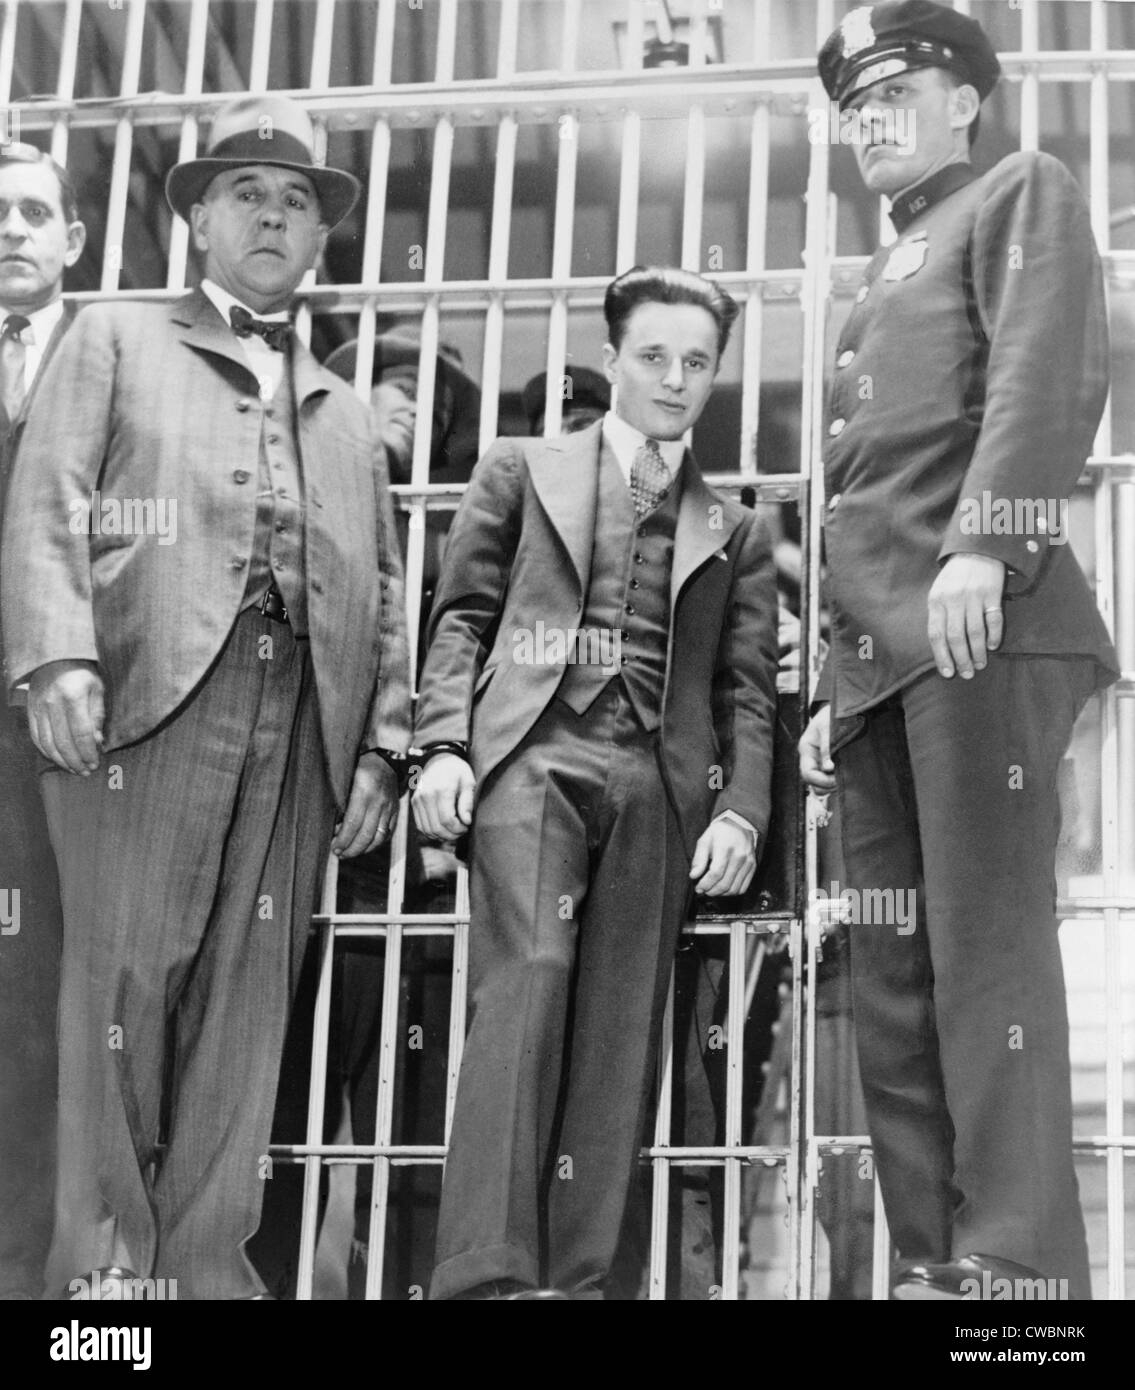 Francis 'Two Gun' Crowley (1911-1932), hand cuffed to a law enforcement officer, as he leaves the jail in Mineola, New York. Stock Photo